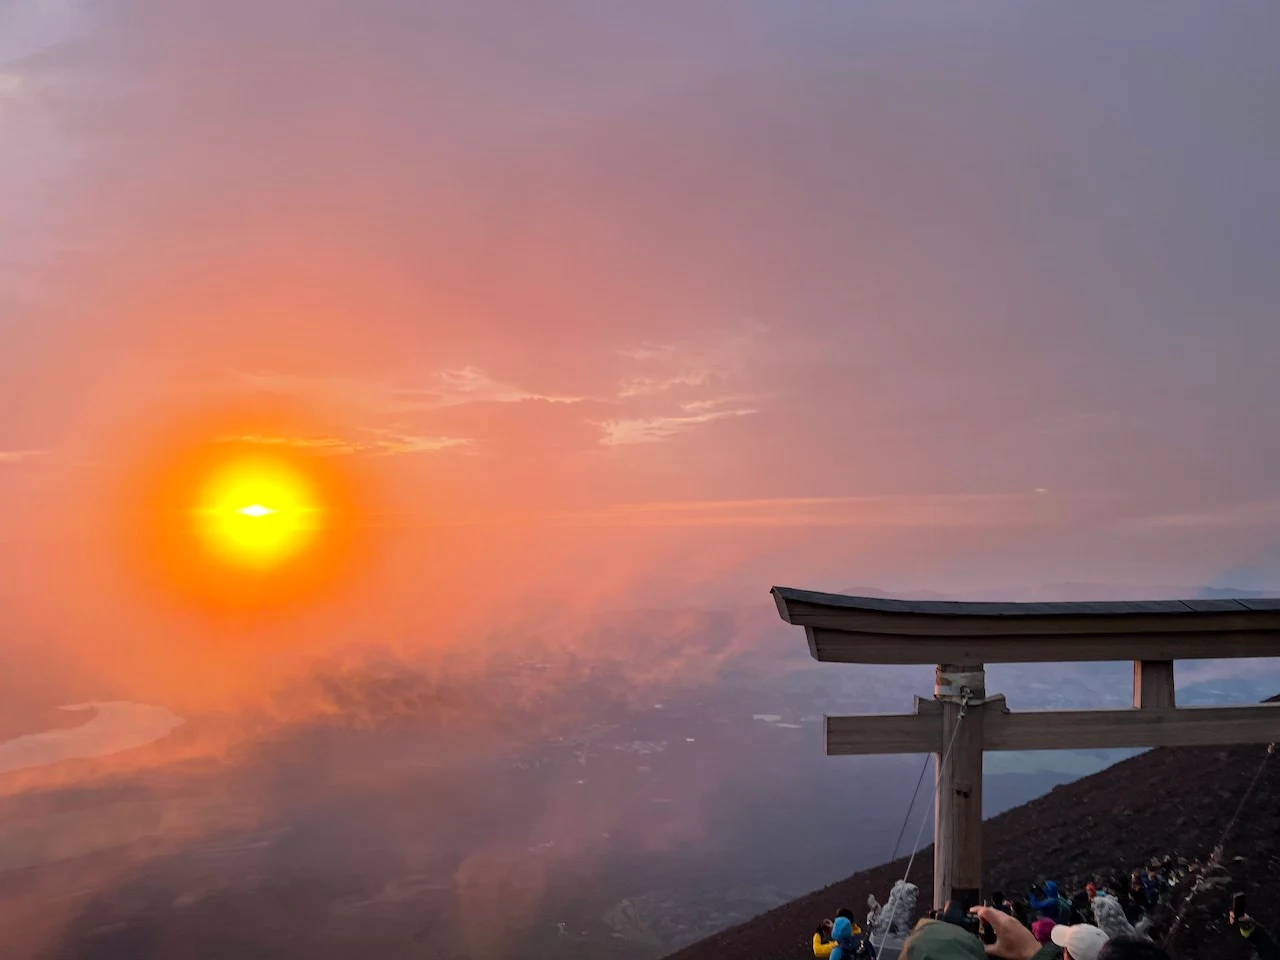 The sunrise seen from the summit of Mt. Fuji